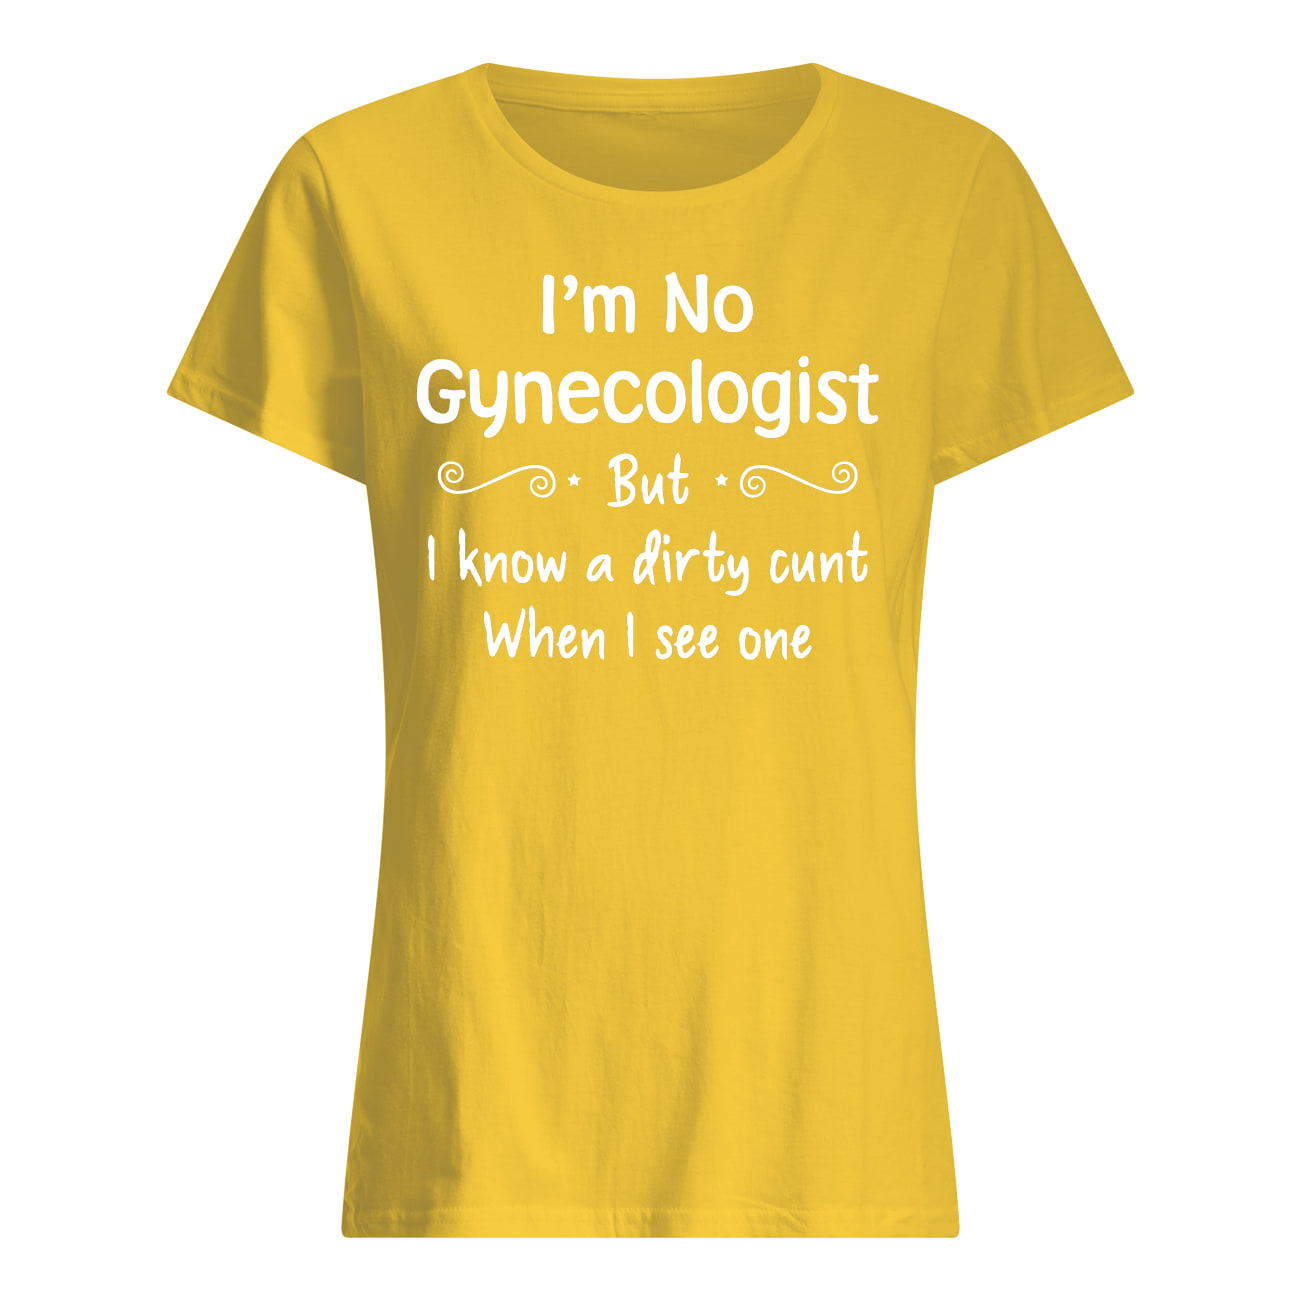 I'm not a gynecologist but I know a cunt when I see one womens shirt